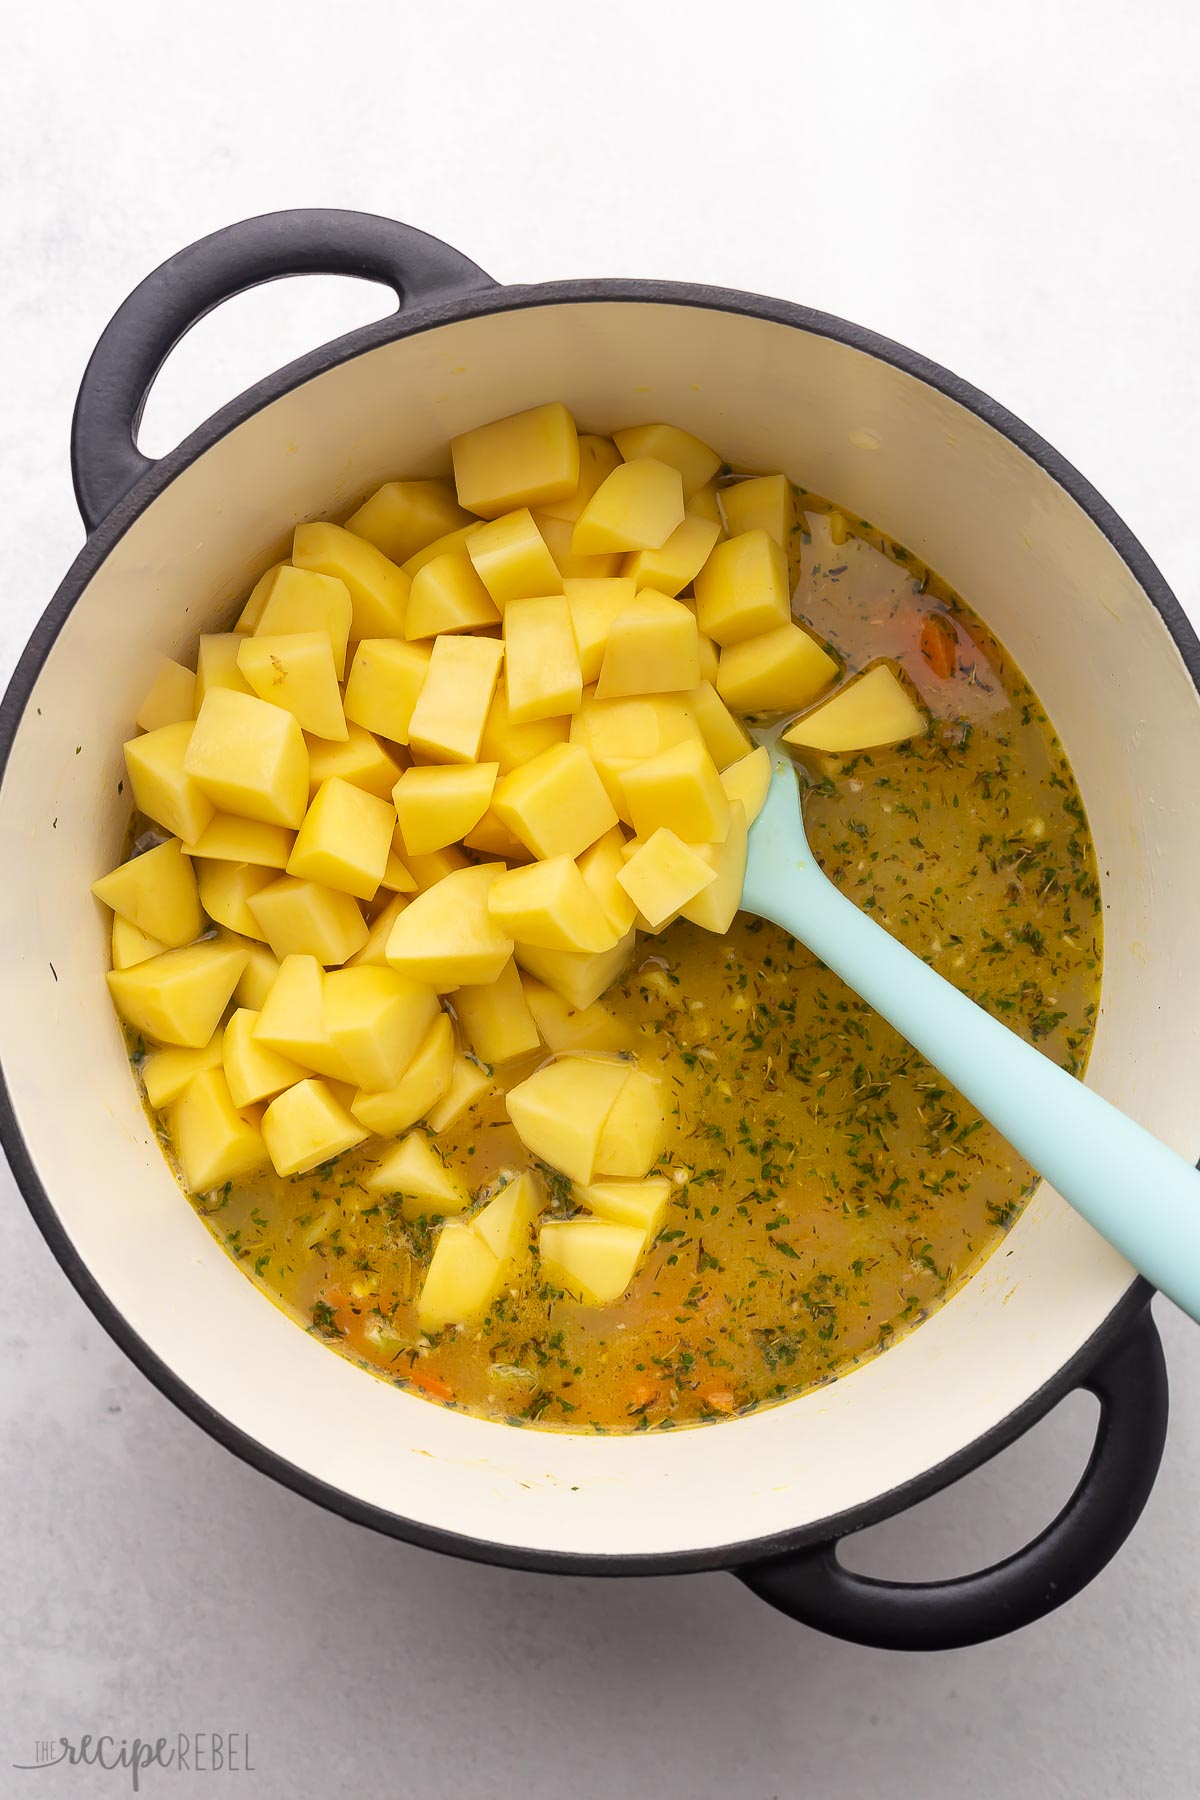 chopped potatoes added into pot with other ingredients.